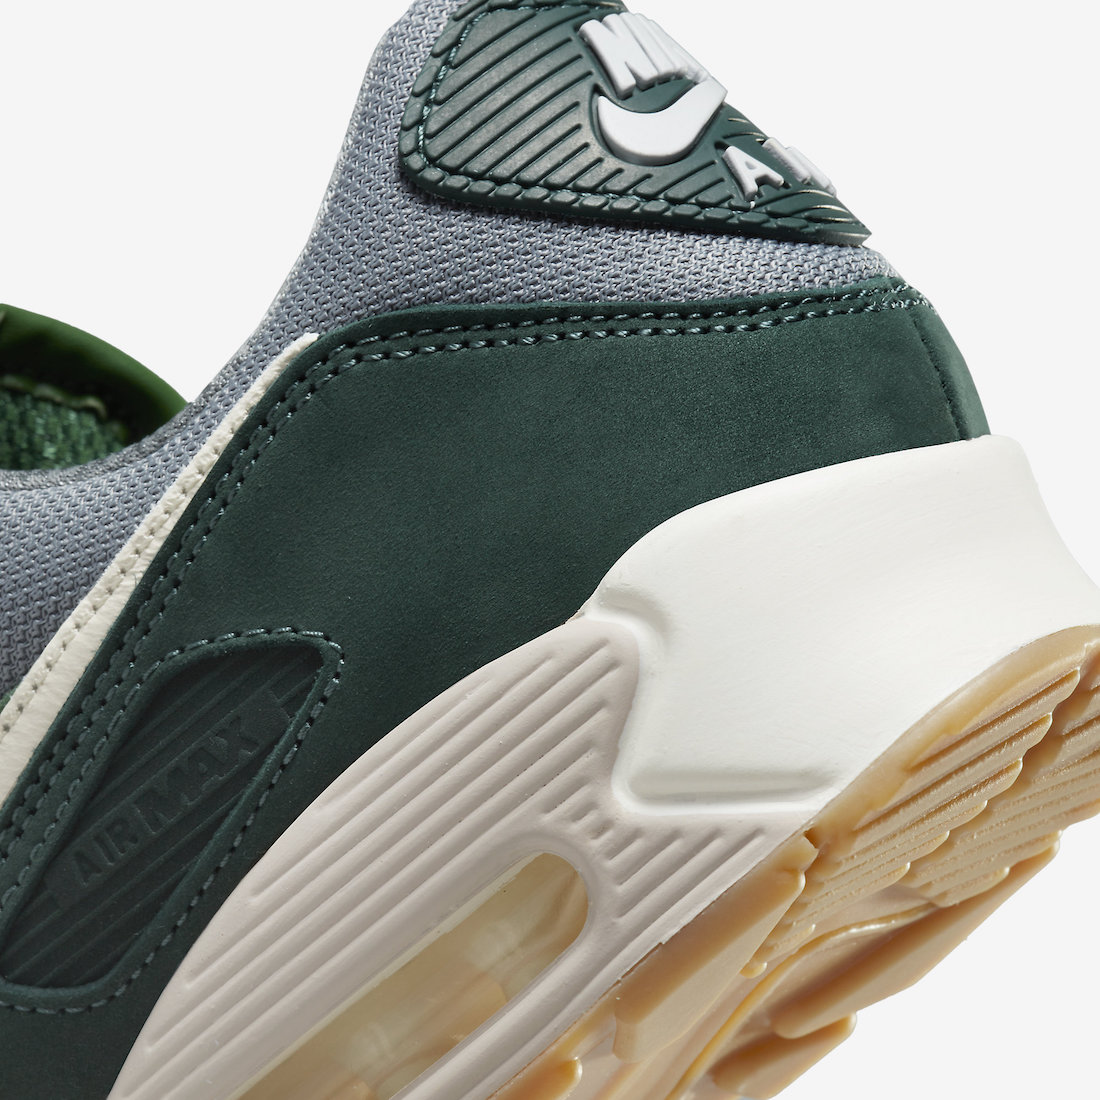 Nike-Air-Max-90-Pro-Green-DH4621-300-Release-Date-7